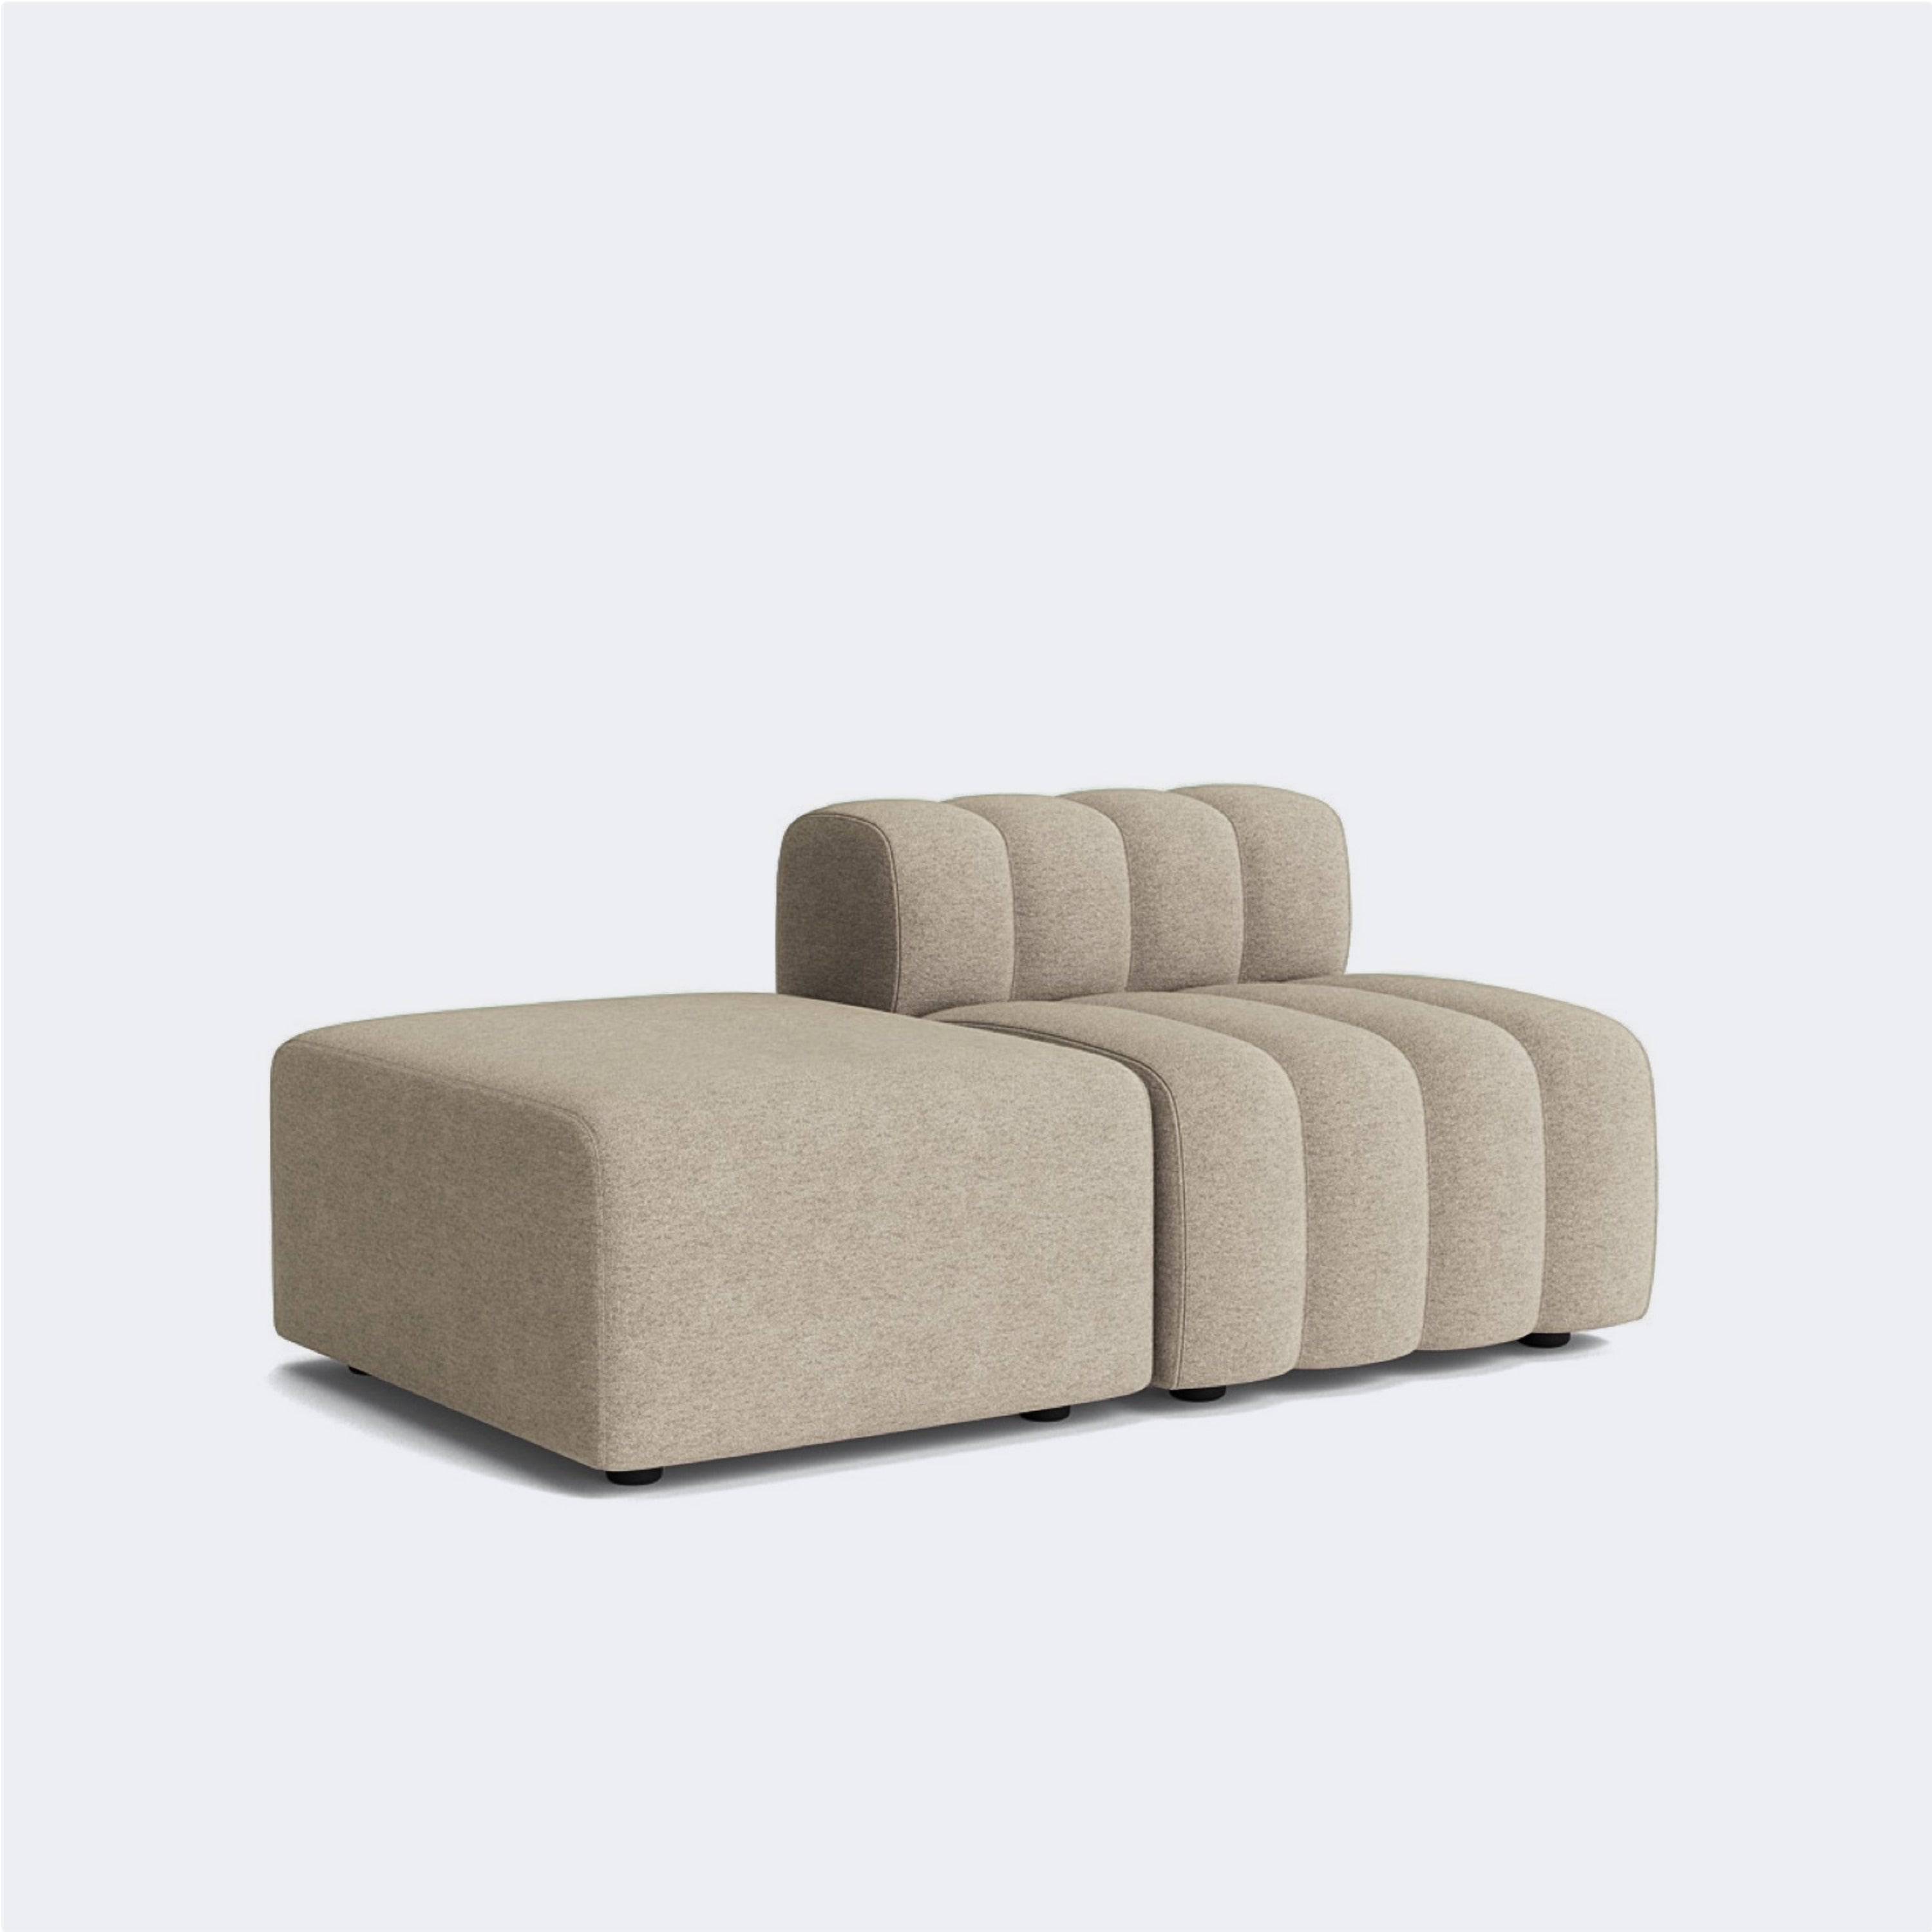 Norr11 Studio 2 Made To Order (8-10 Weeks) Barnum Col 3 - KANSO#Upholstery_Barnum Col 3